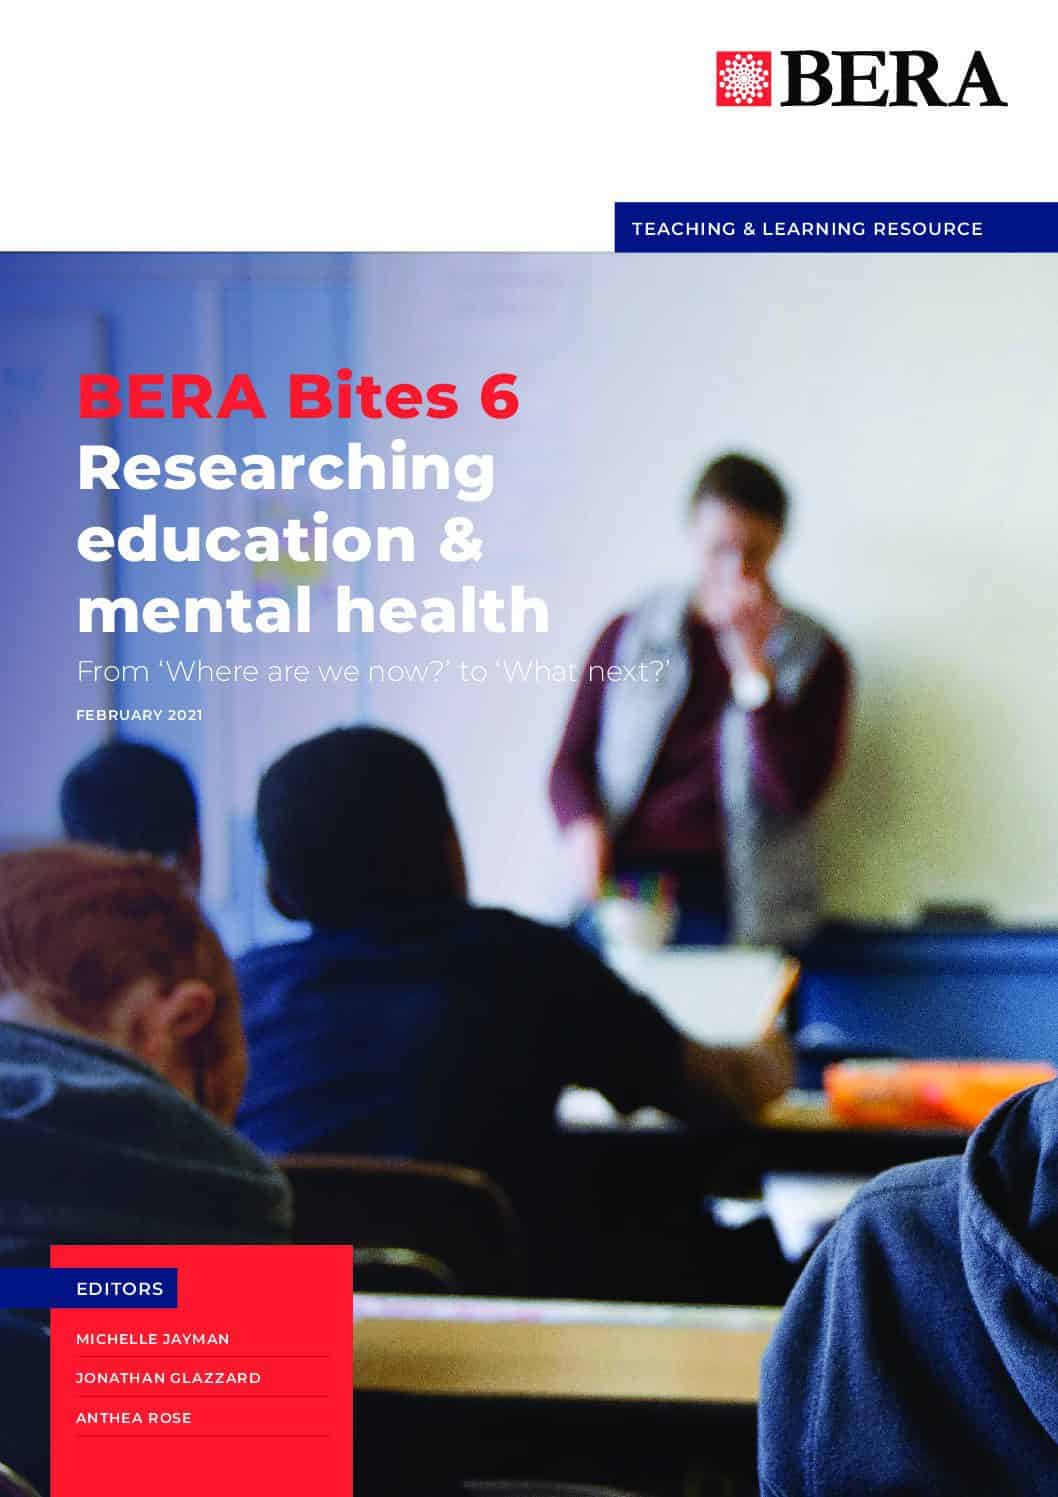 Researching education & mental health: From ‘Where are we now?’ to ‘What next?’